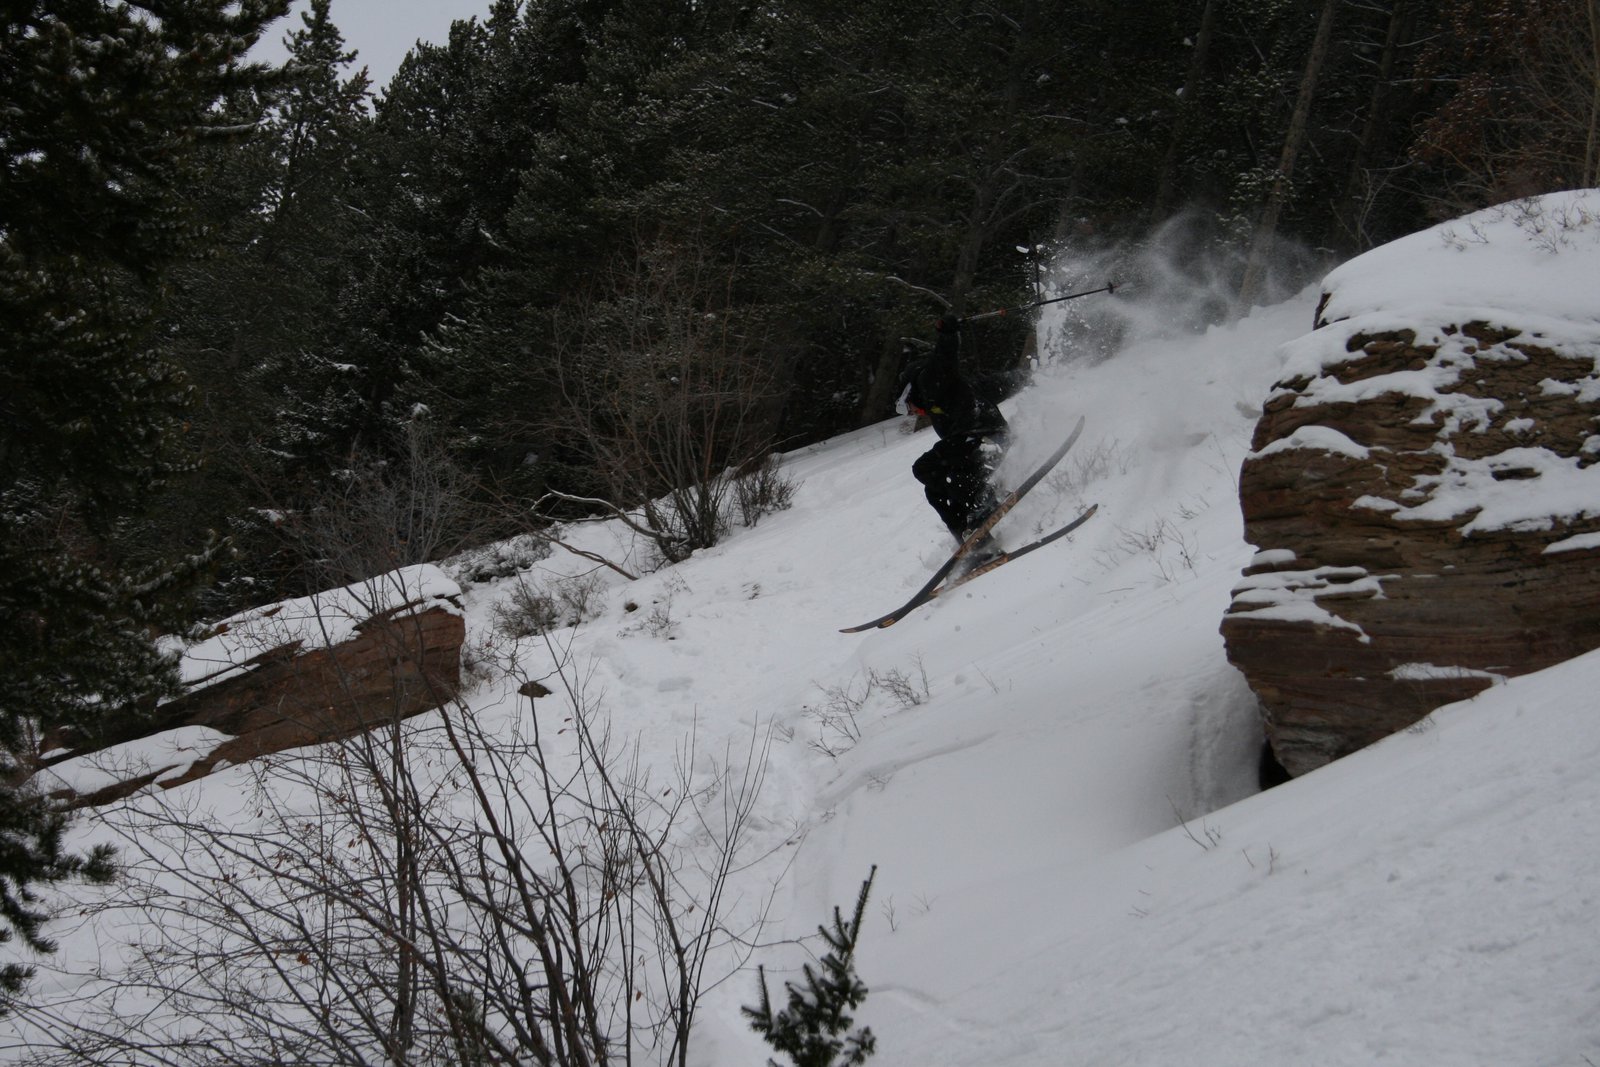 Vail Cliff